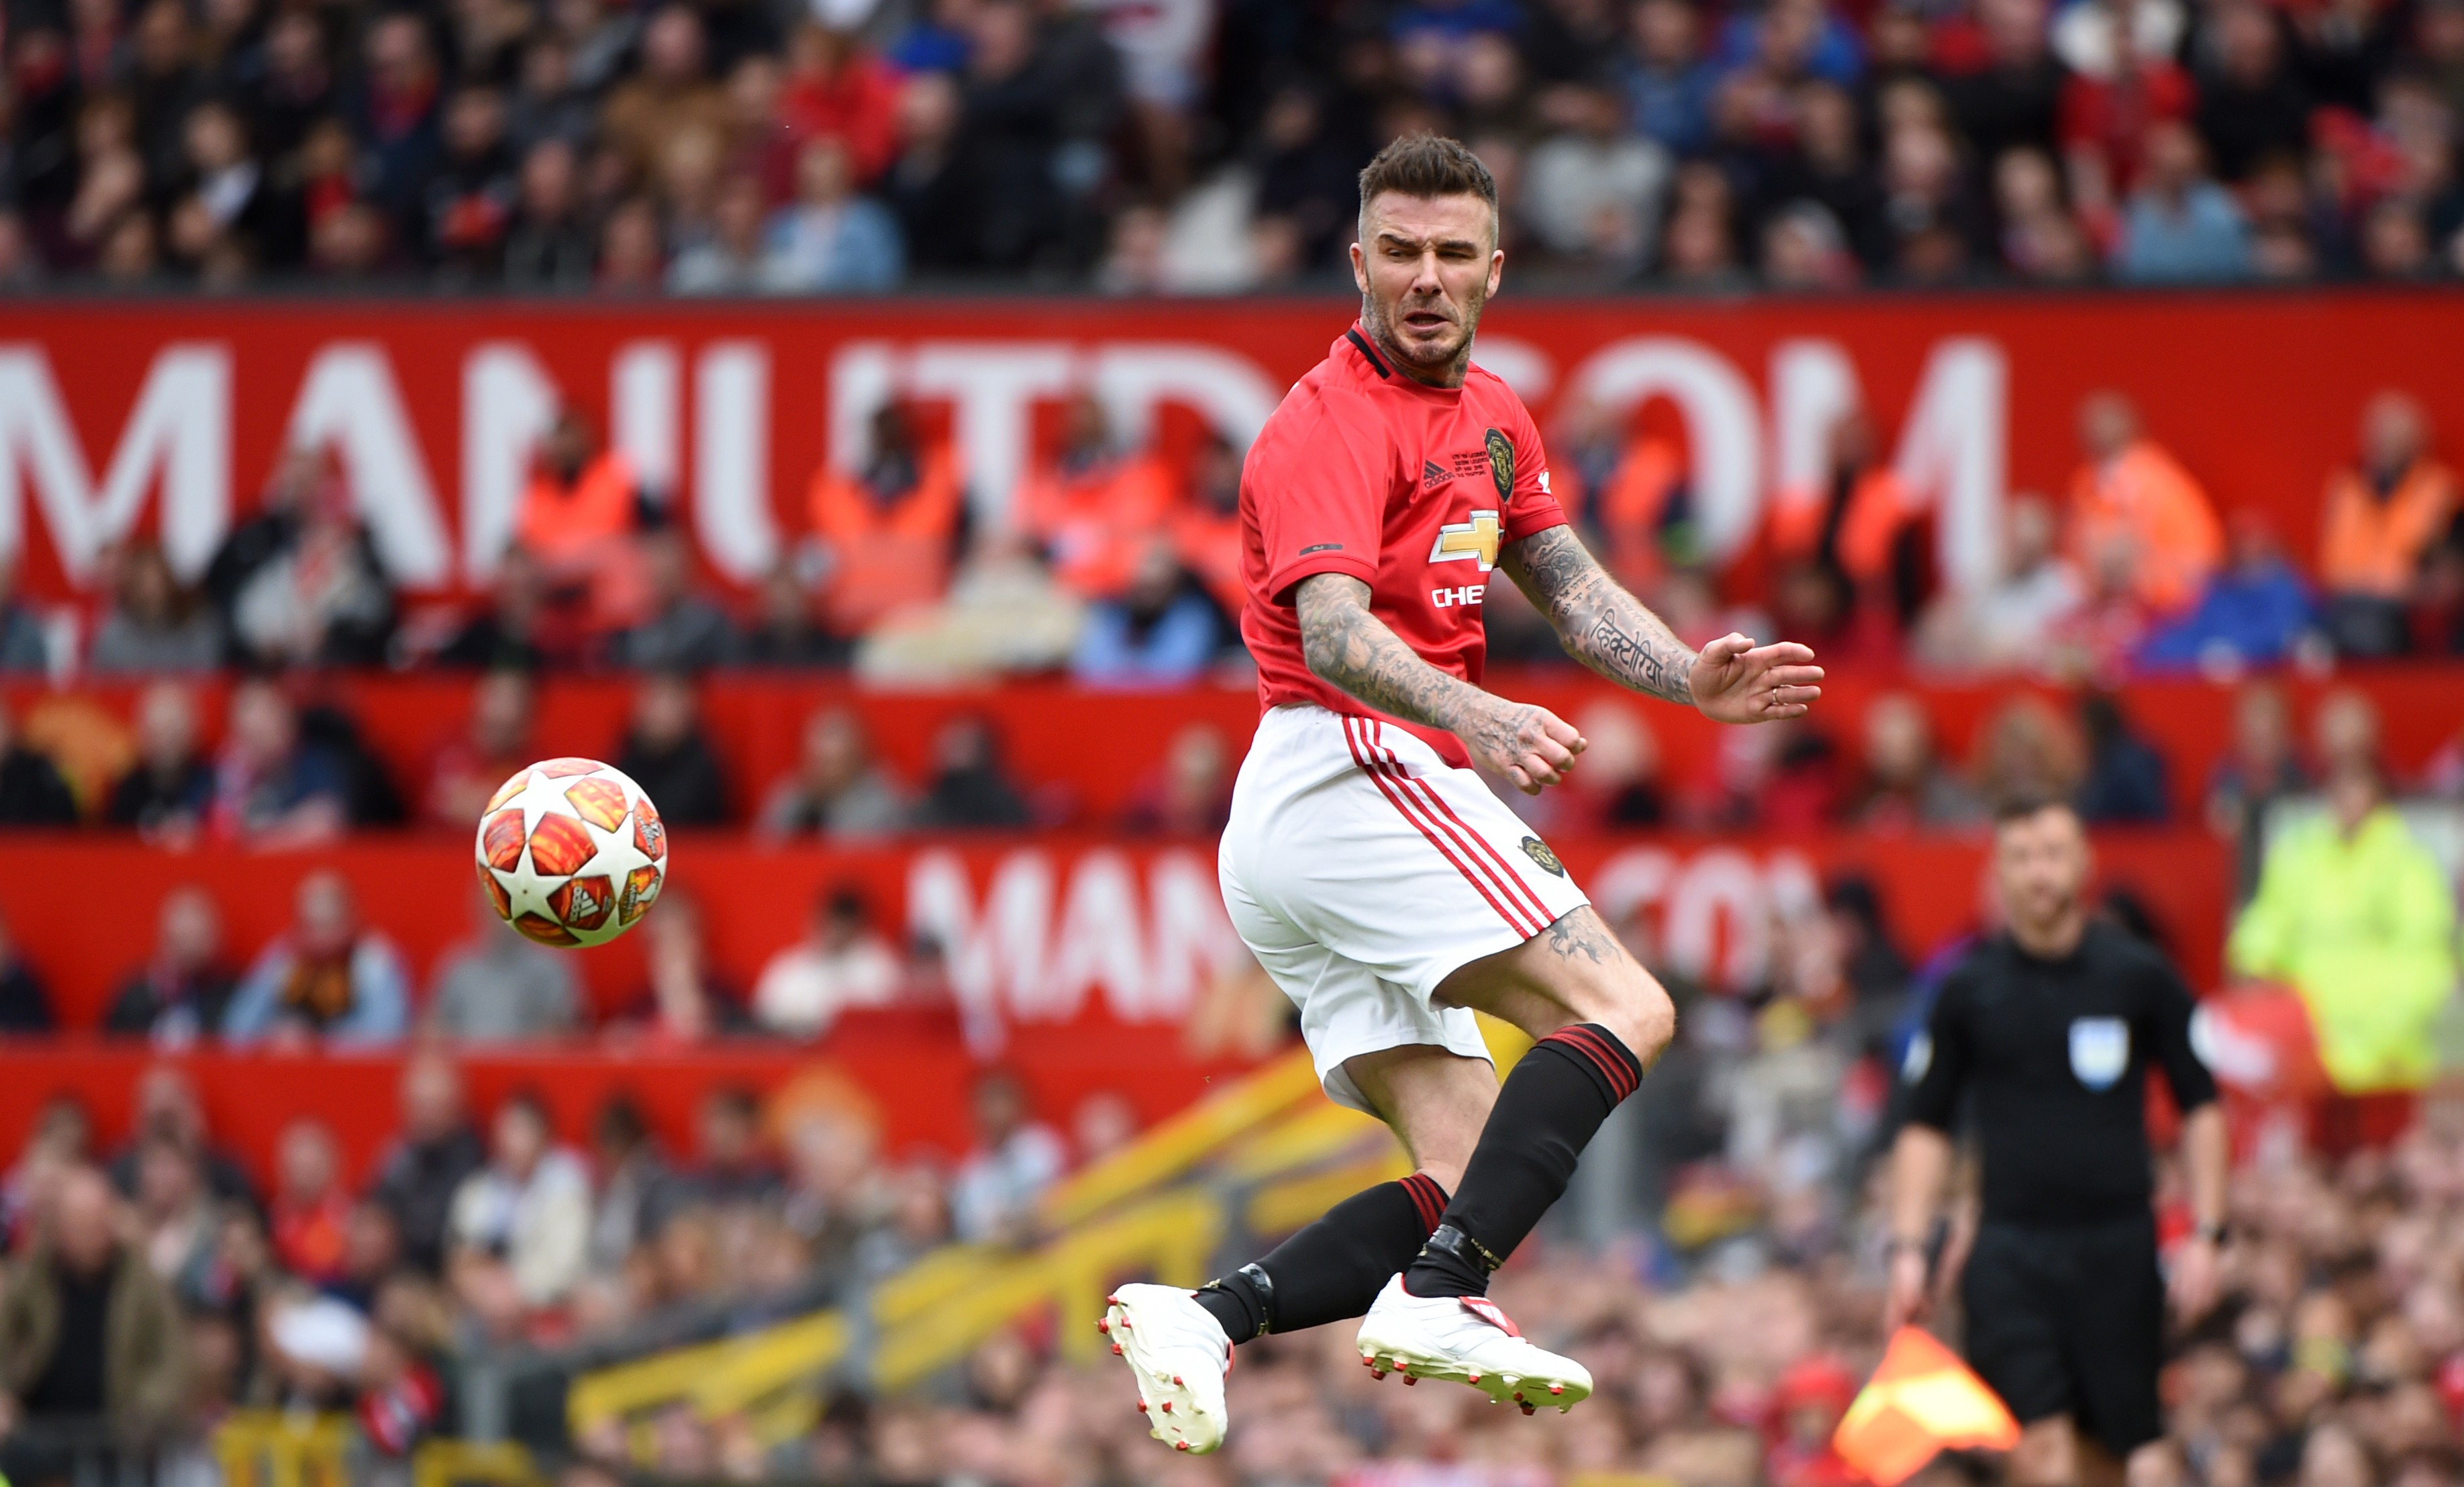 MANCHESTER, ENGLAND - MAY 26: David Beckham of Manchester United in action during the Manchester United '99 Legends and FC Bayern Legends at Old Trafford on May 26, 2019 in Manchester, England. (Photo by Nathan Stirk/Getty Images) (Foto: Getty Images)